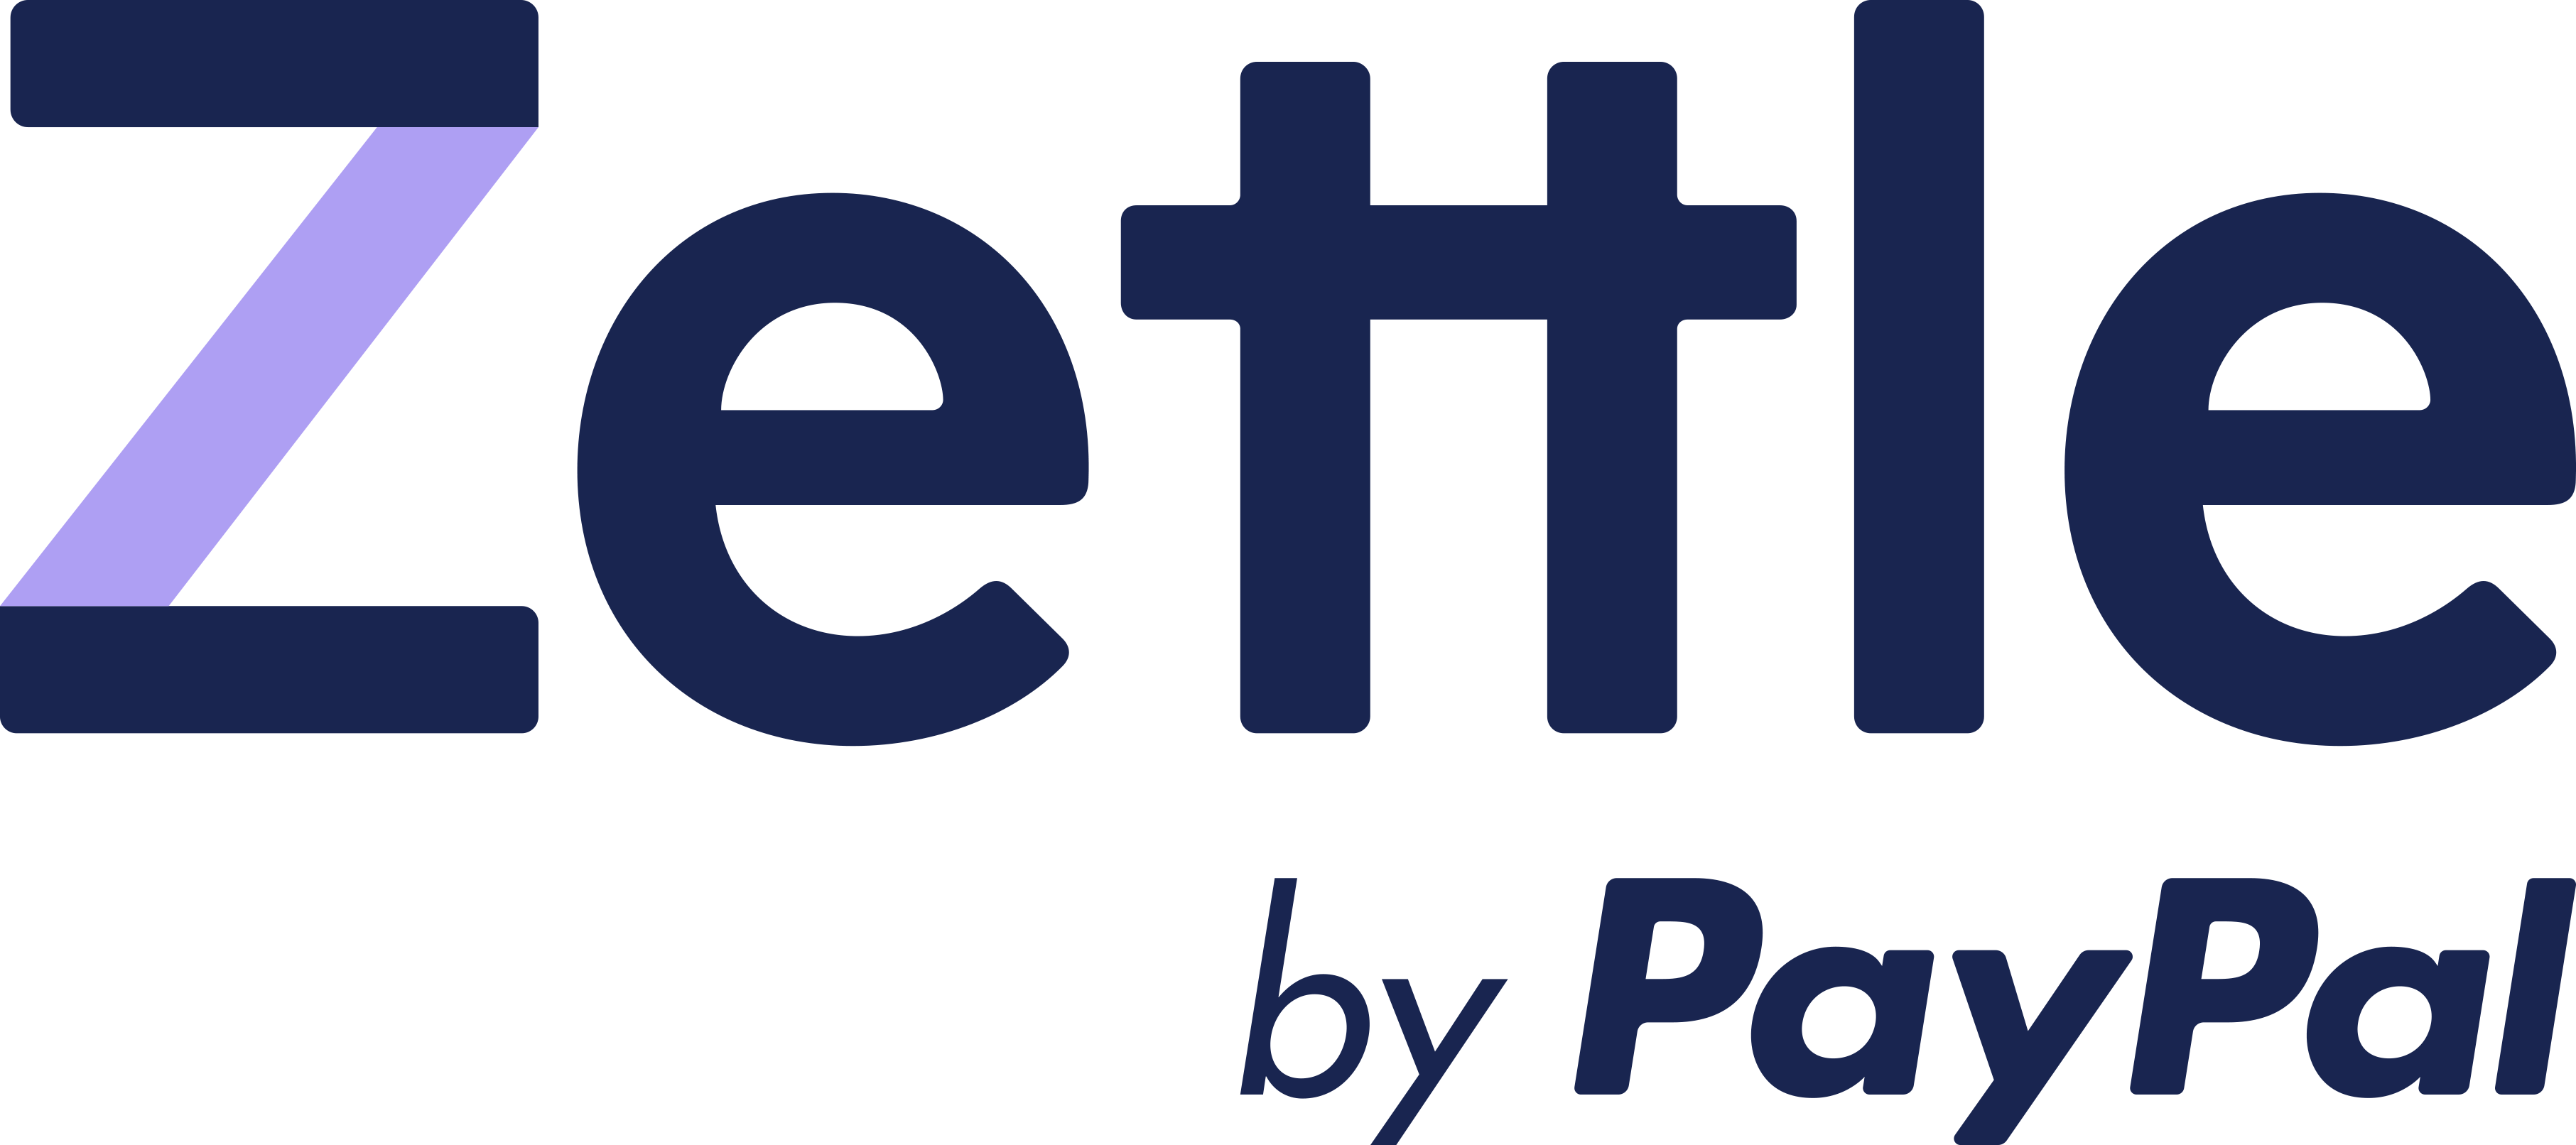 Zettle_by_PayPal